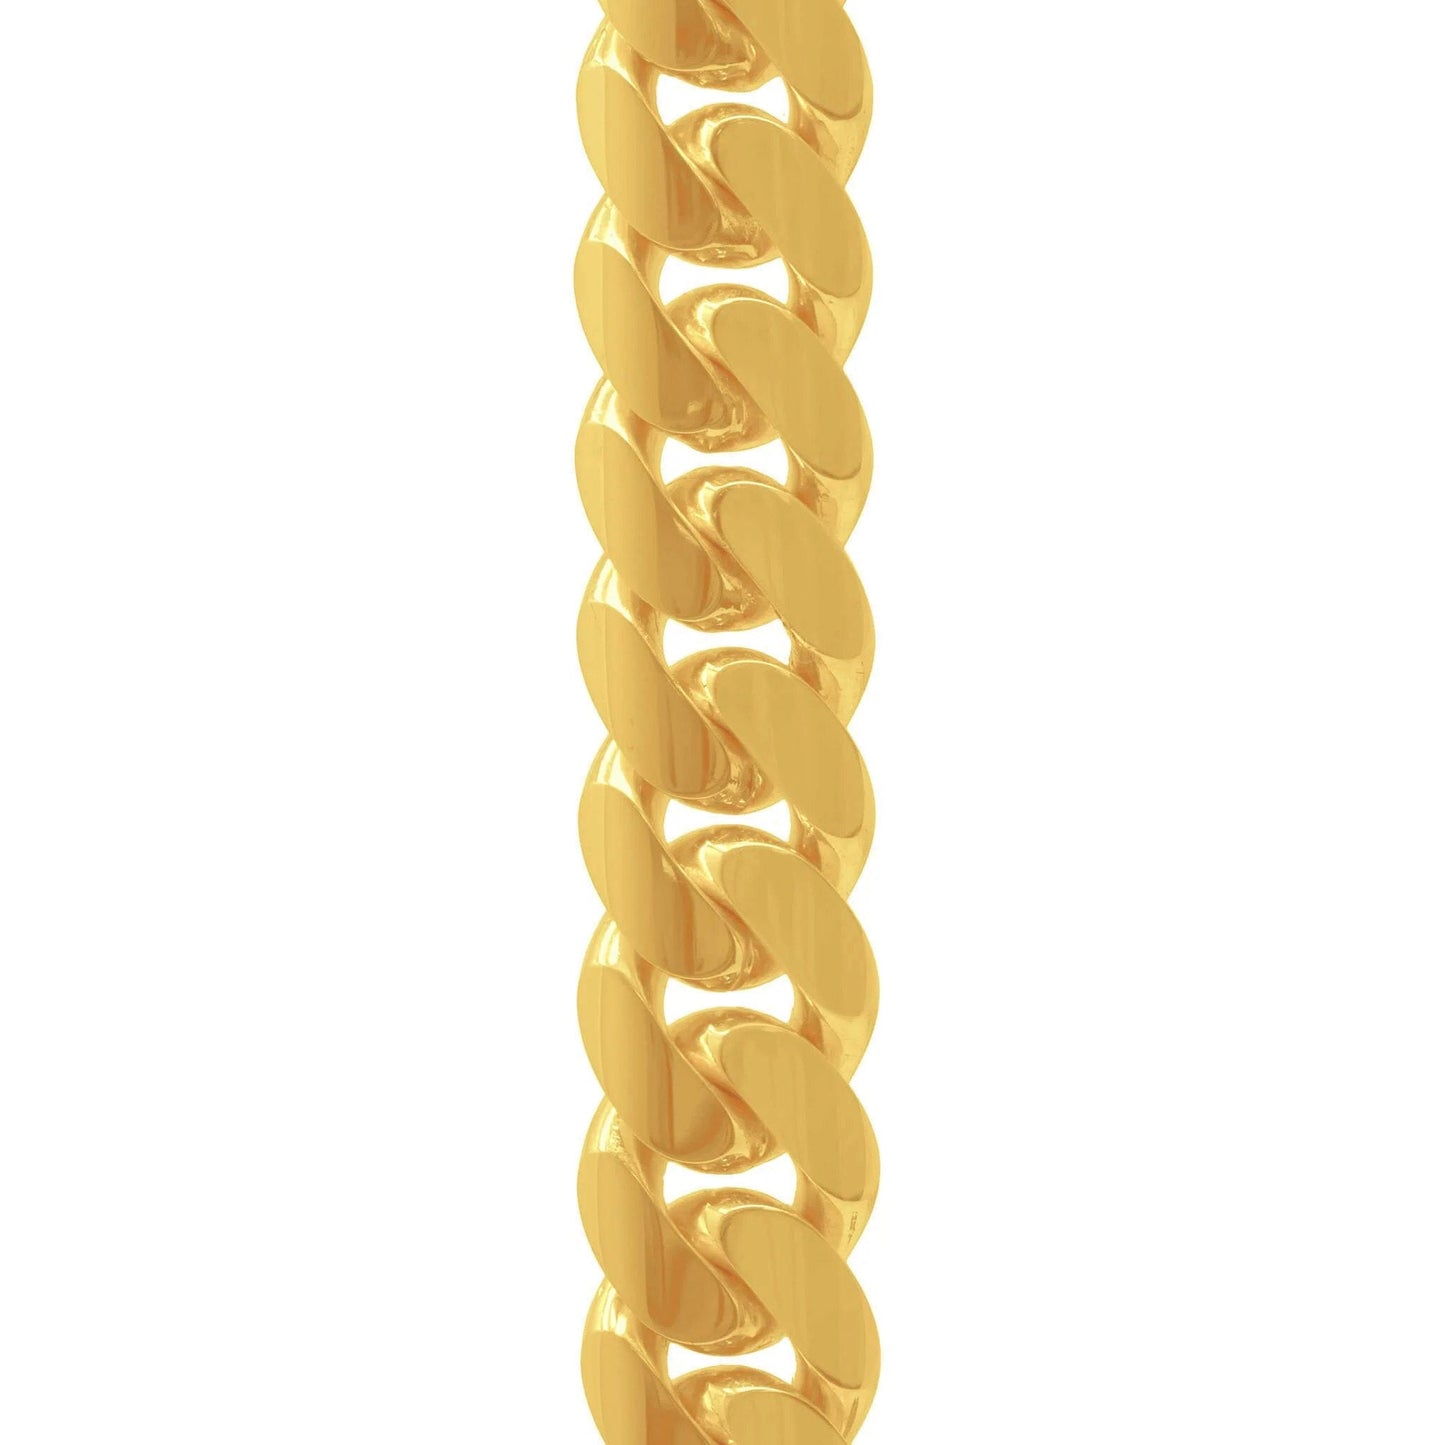 18mm Miami Cuban Link Bracelet in 14K Solid Yellow Gold - Vera Jewelry in Miami